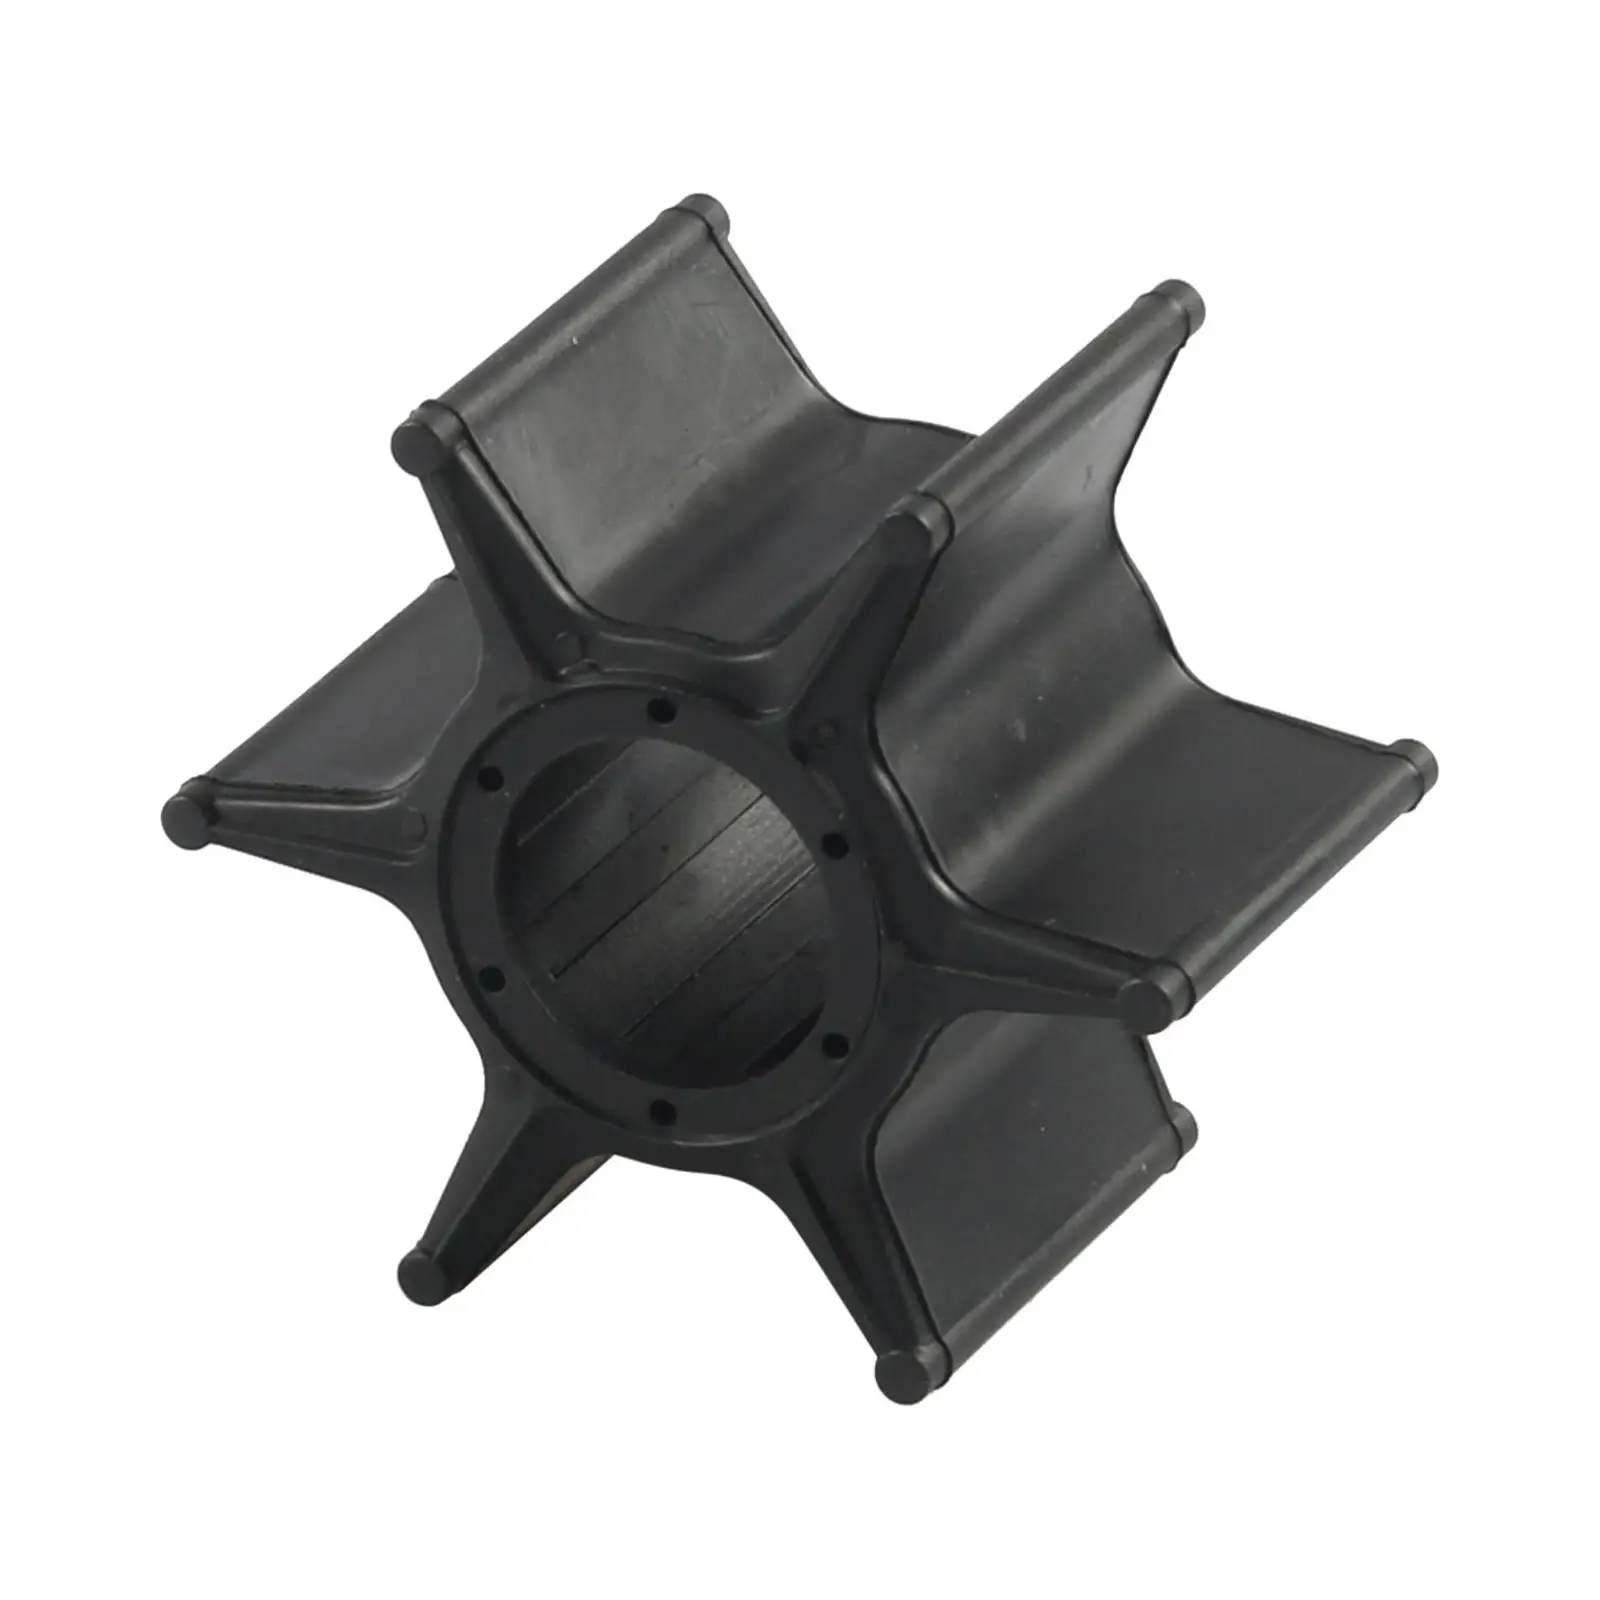 Water Pump Impeller 67F-44352-00-00 Professional Replaces 67F-44352-00 for Yamaha 4 Stroke F75 F80 F90 Easily Install